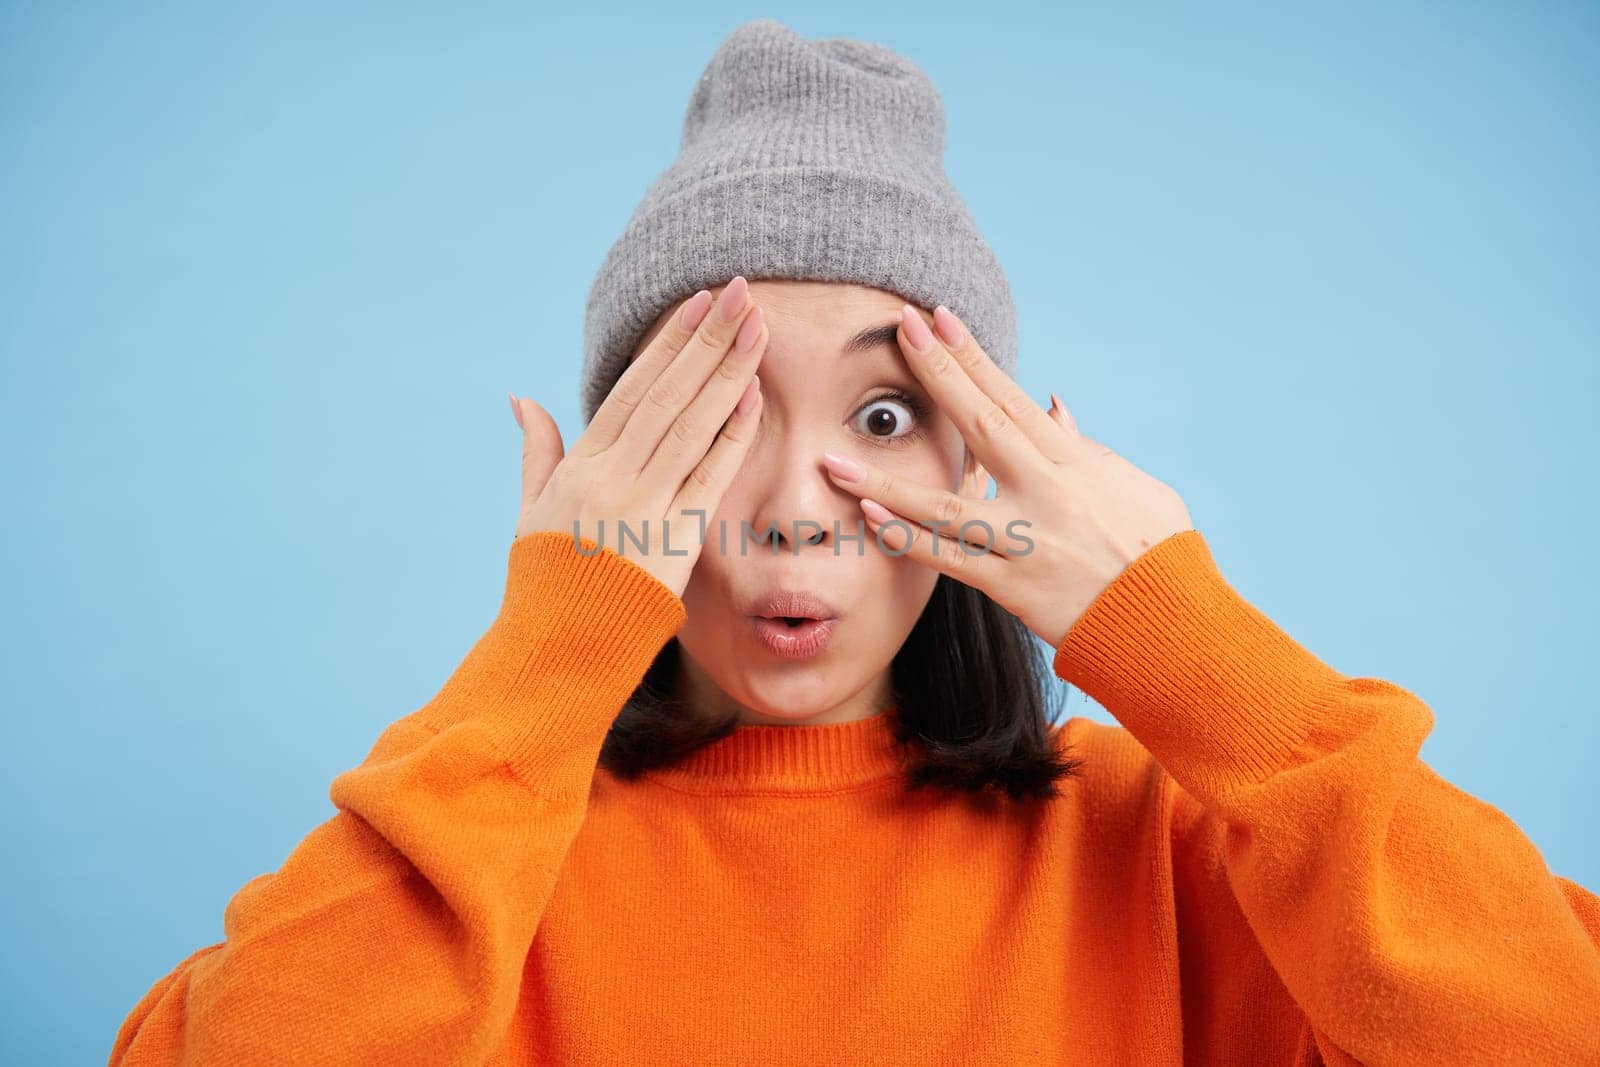 Surprised korean girl in warm hat, looks amazed at camera, expresses interest and amazement, stands in orange sweatshirt over blue background.